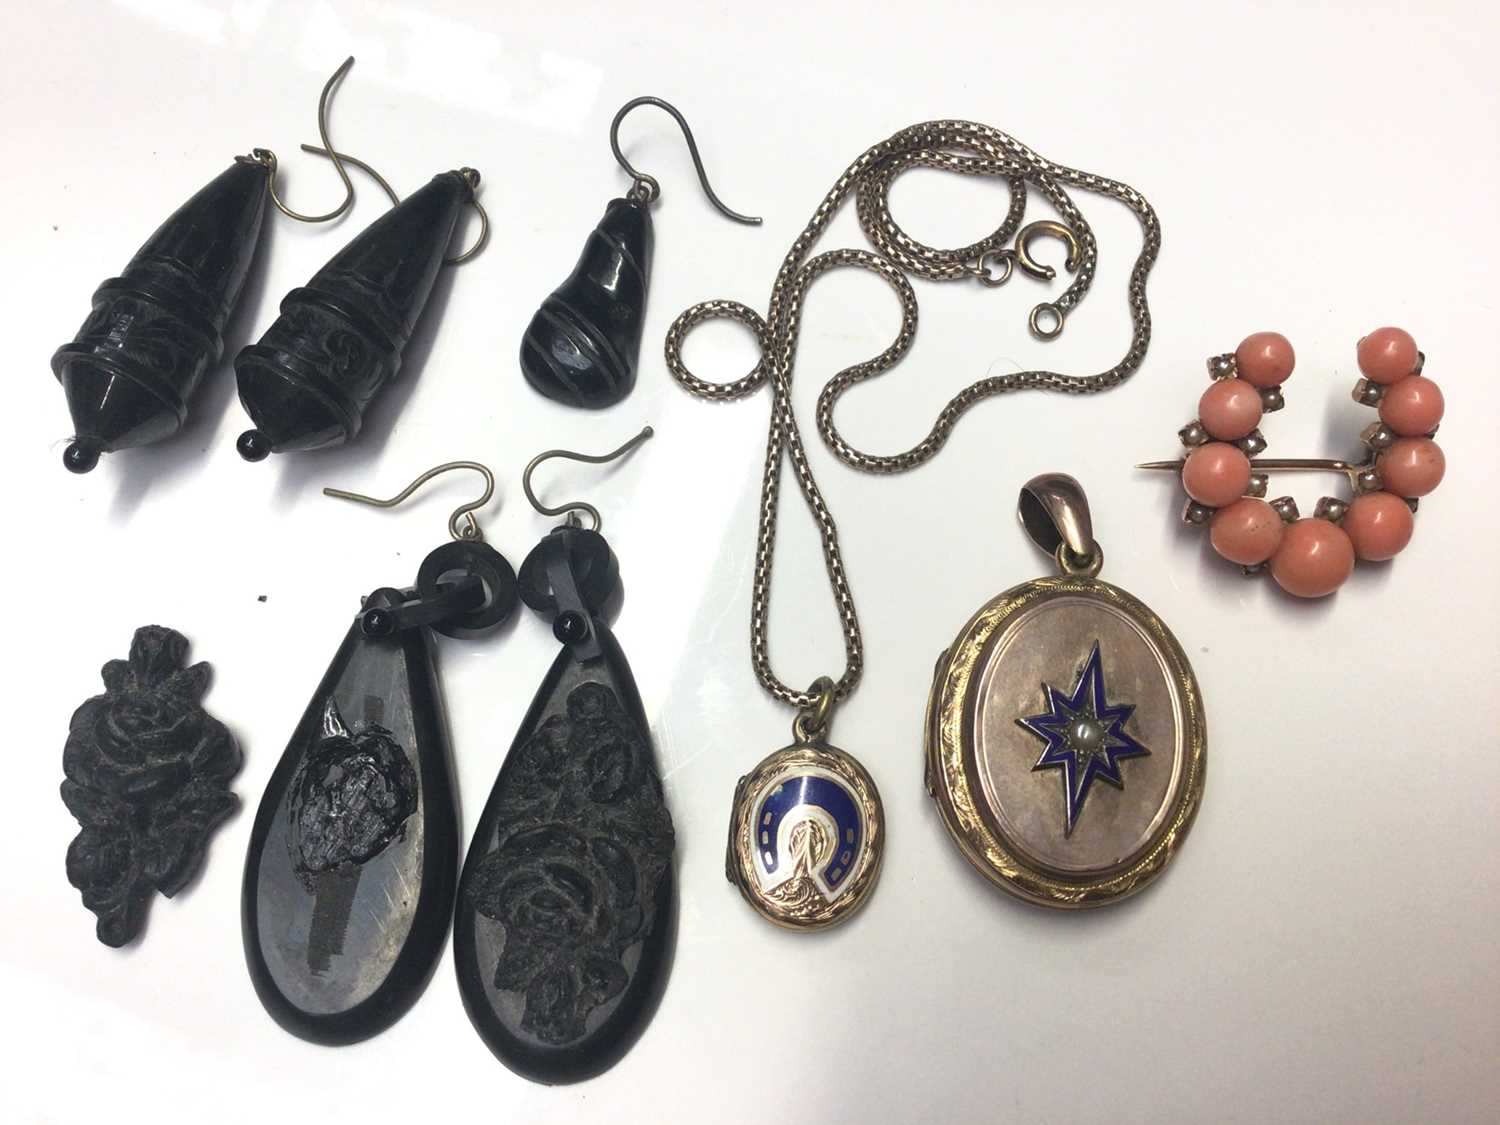 Lot 23 - Victorian coral and seed pearl horseshoe shaped brooch, two antique mourning lockets with enamel decoration and a small selection of jet earrings